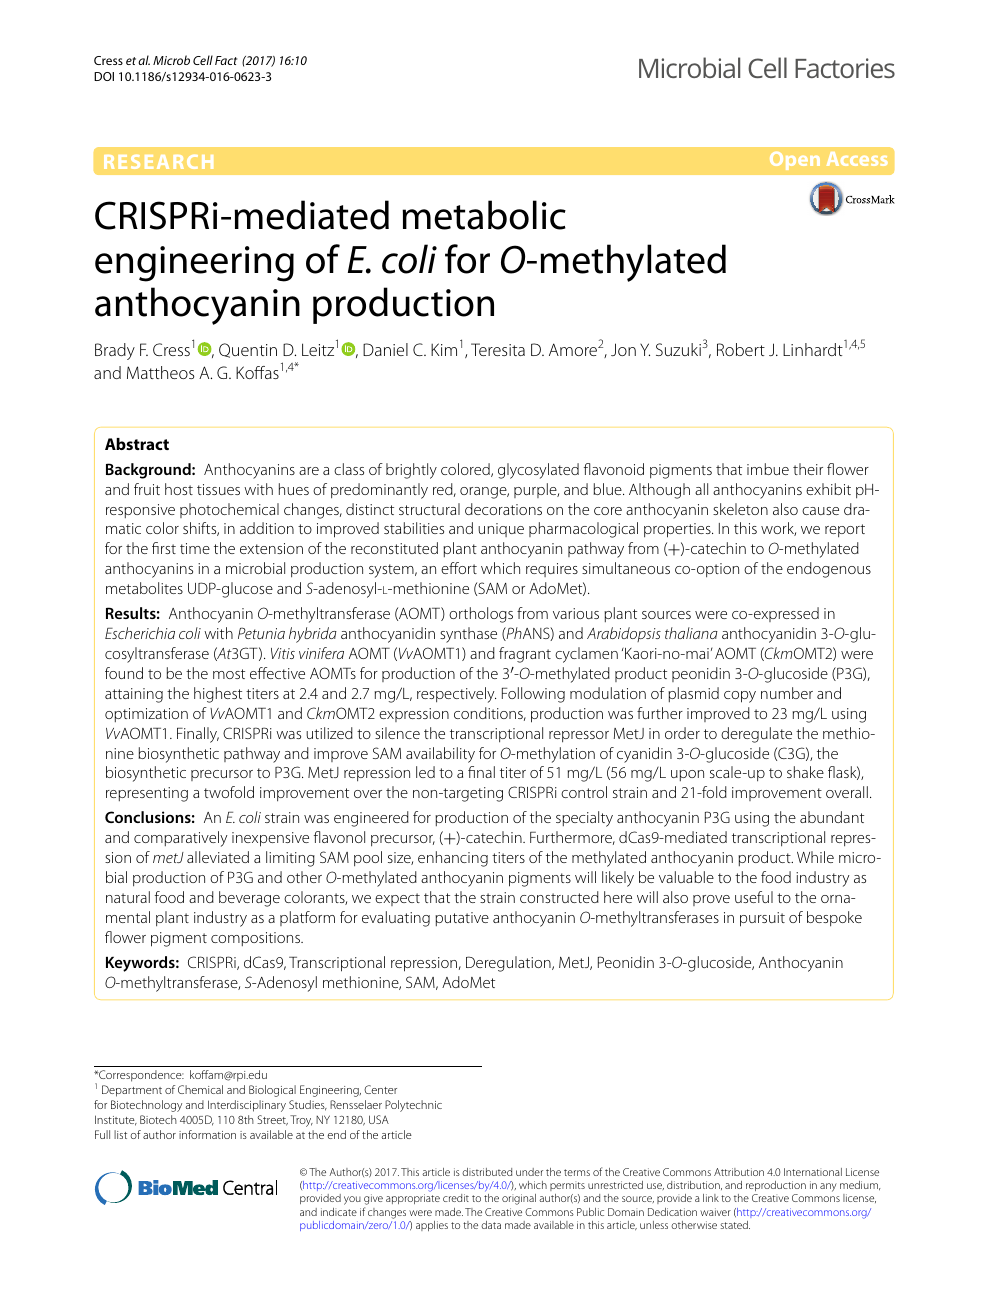 Crispri Mediated Metabolic Engineering Of E Coli For O Methylated Anthocyanin Production Topic Of Research Paper In Biological Sciences Download Scholarly Article Pdf And Read For Free On Cyberleninka Open Science Hub